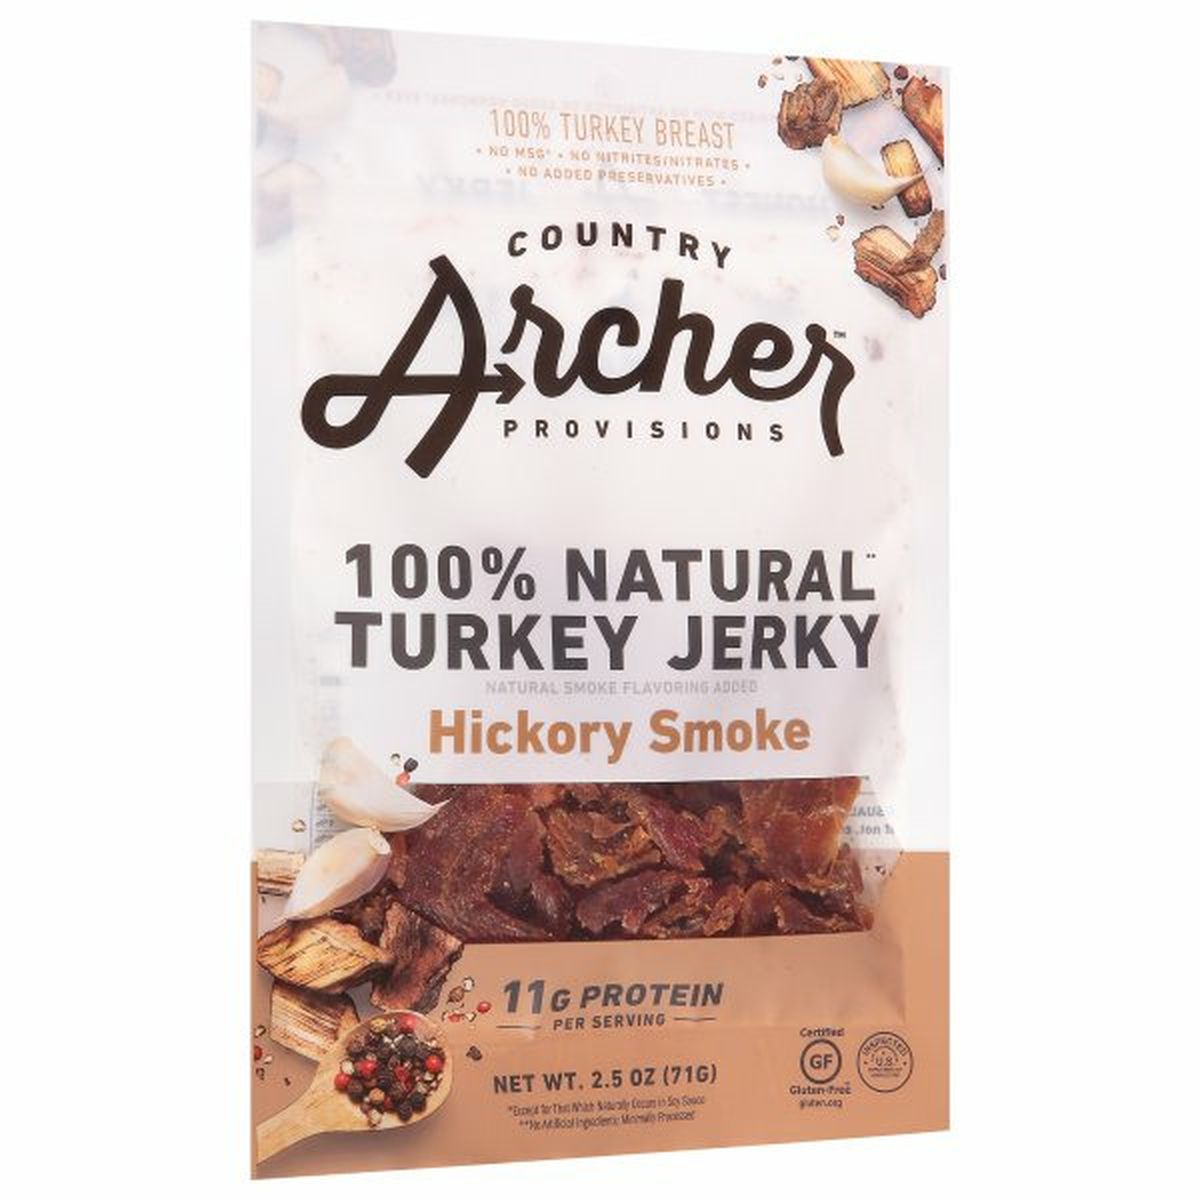 Calories in Country Archer Provisions Turkey Jerky, Hickory Smoke, 100% Natural